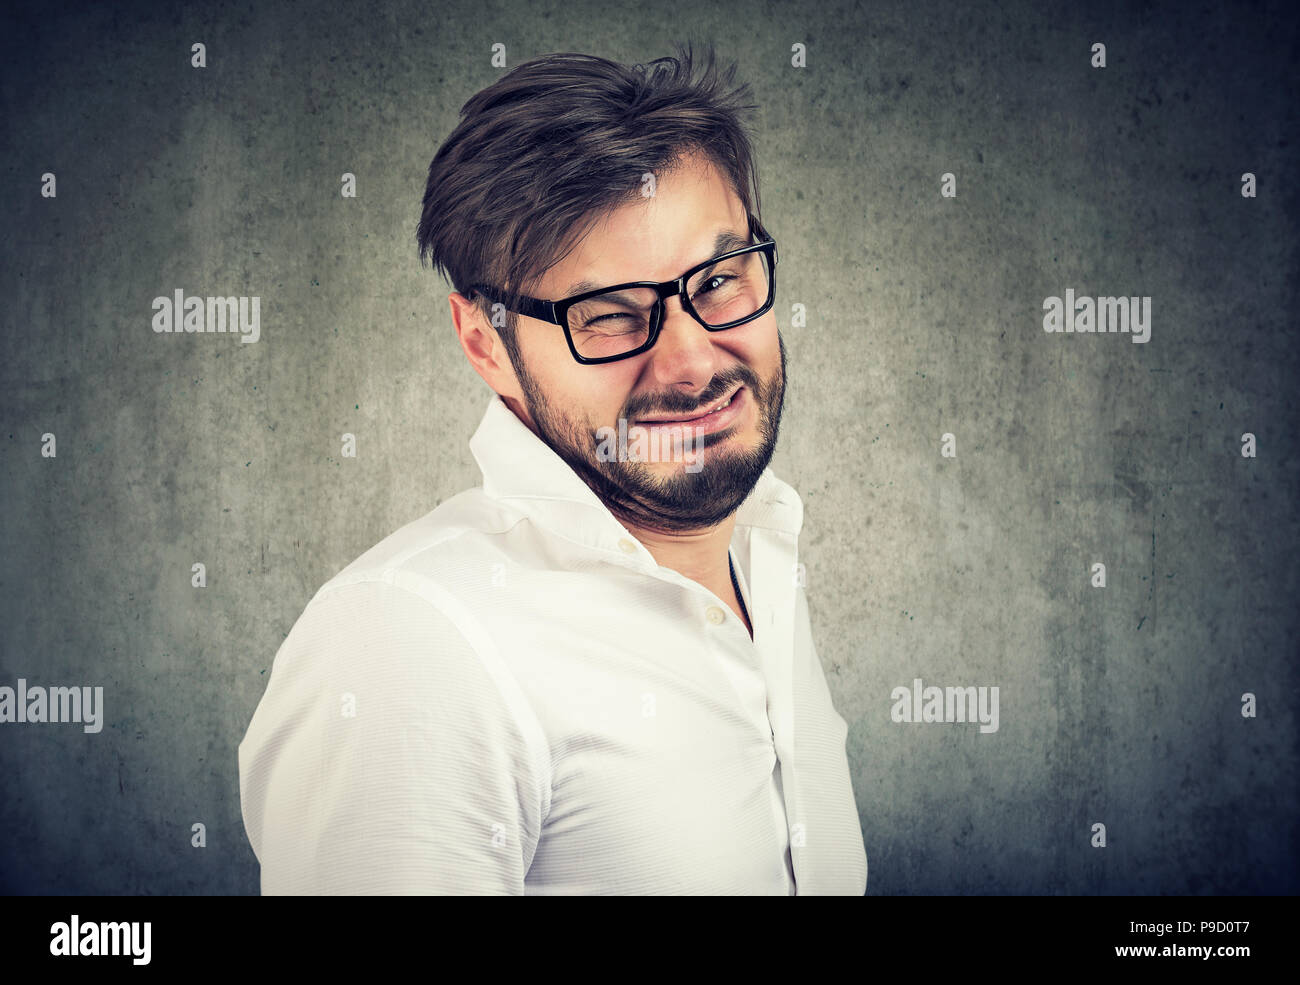 Portrait of a disgusted young man Stock Photo